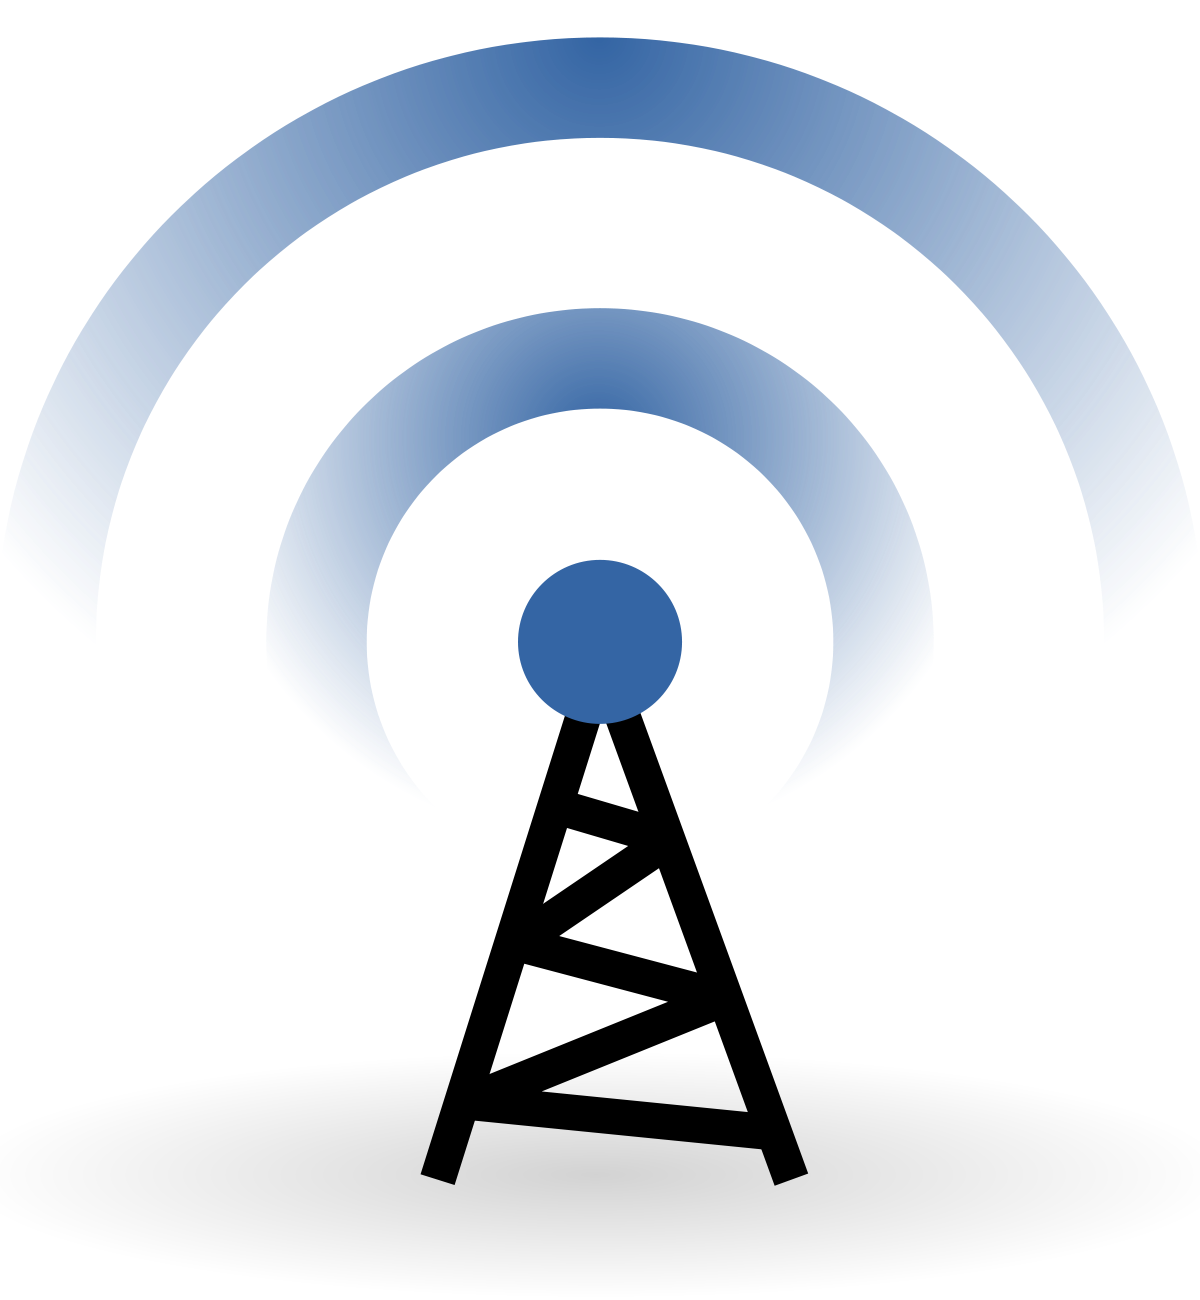 Reliable internet connection icon